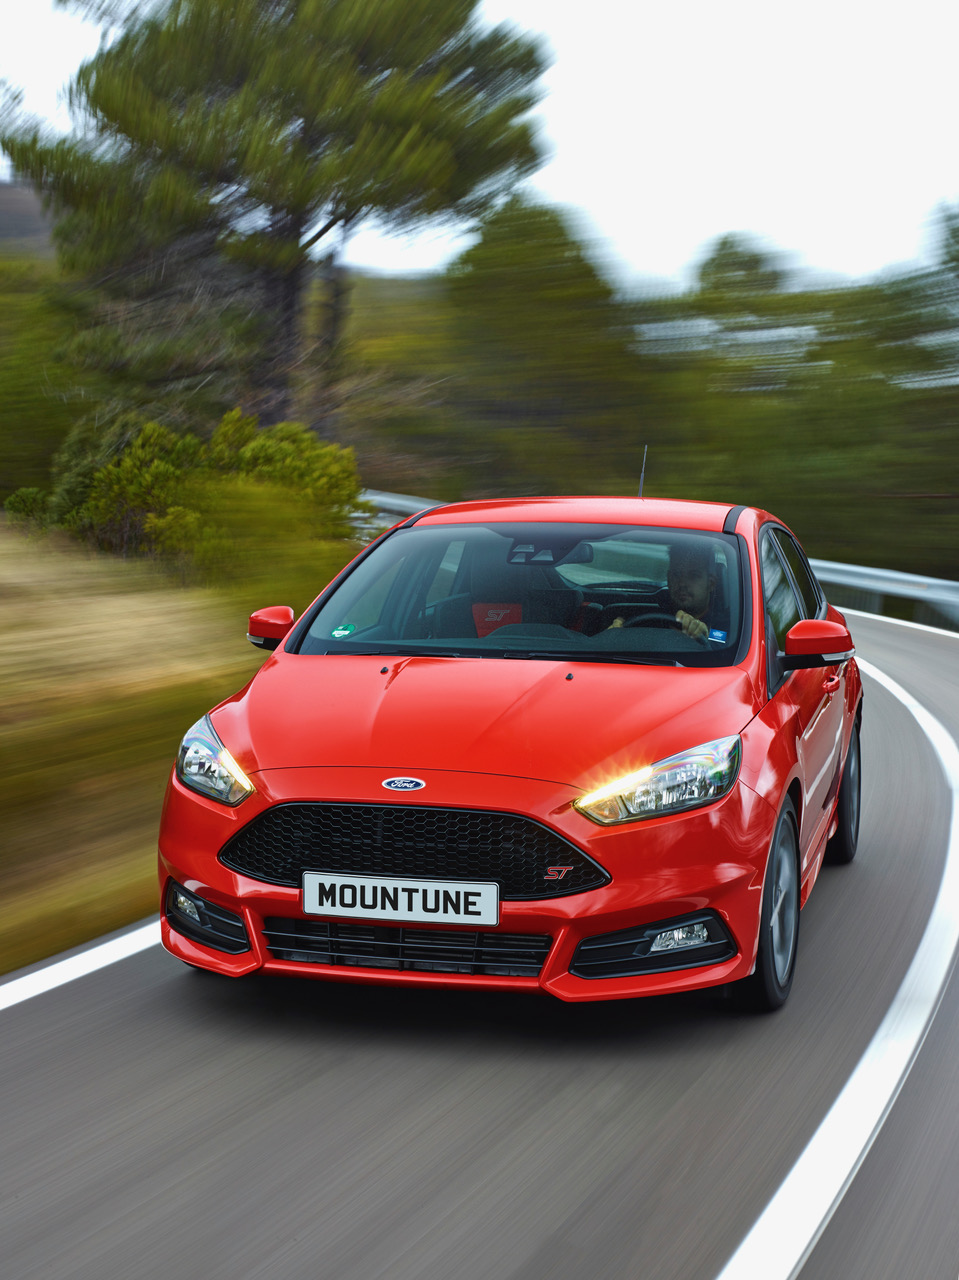 Tuning PR: mountune launches m460D power upgrade kit for Focus ST diesel